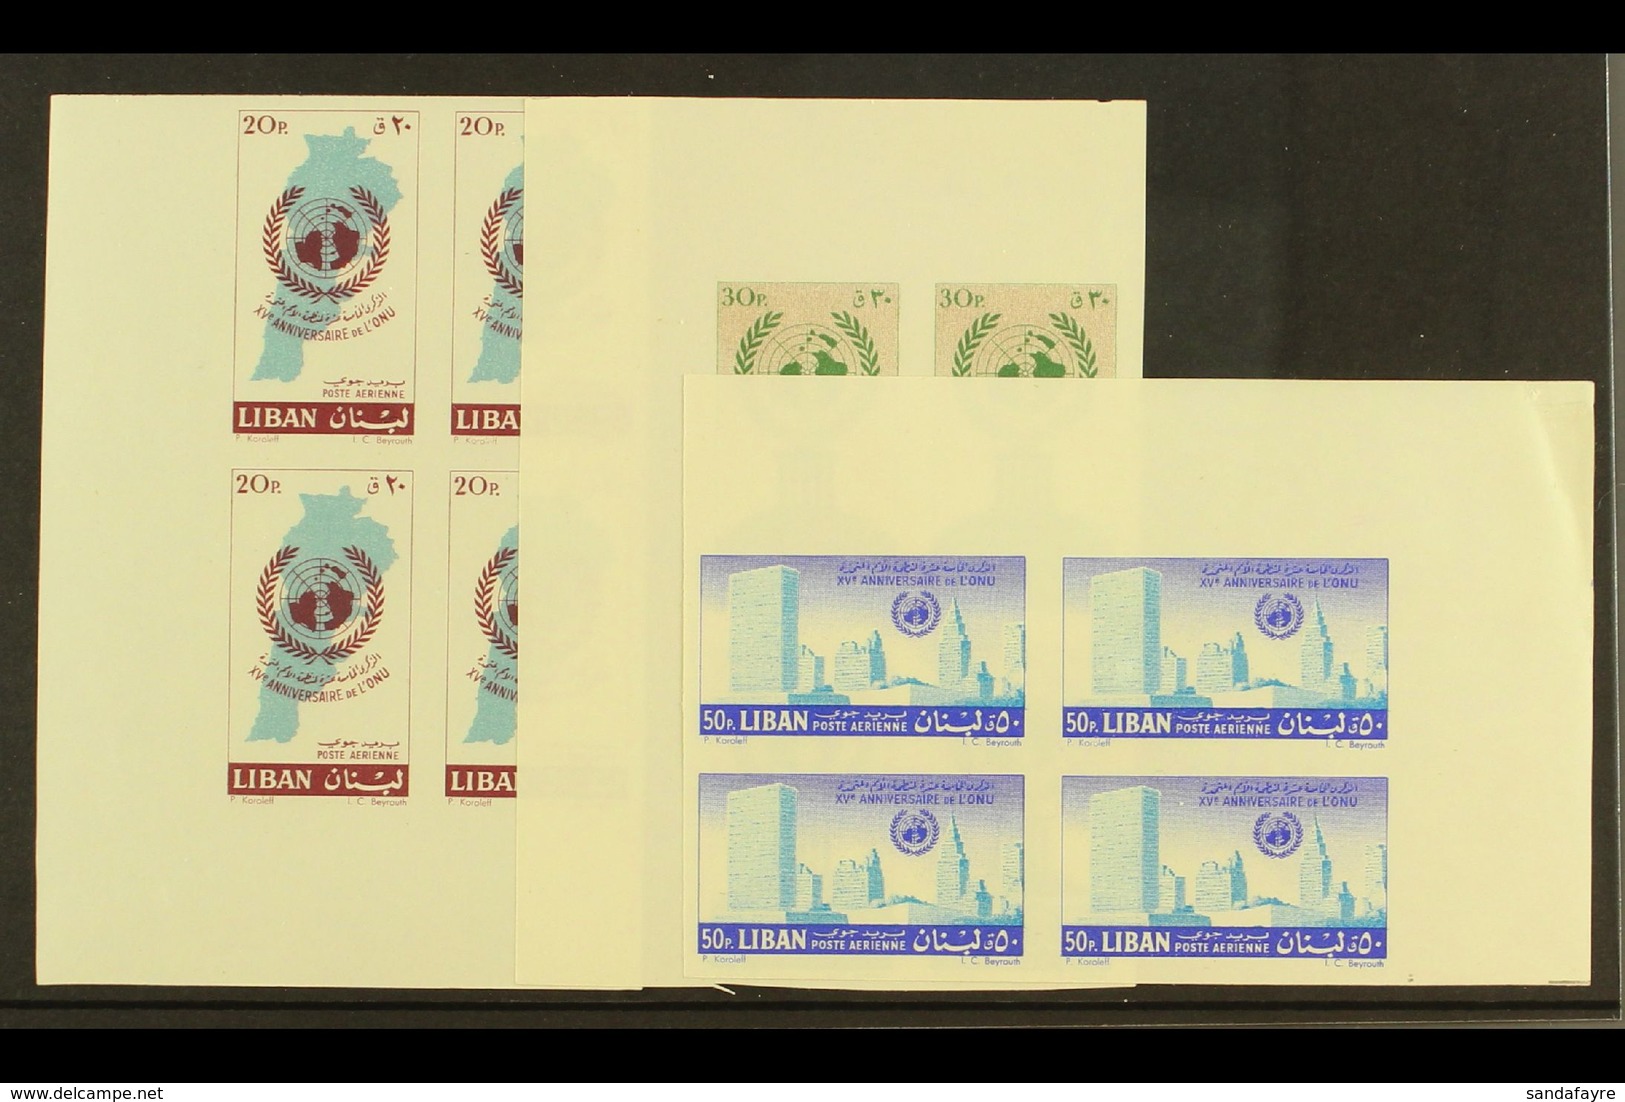 1961 Anniversary Of The United Nations IMPERFORATE Set (as SG 683/85) Never Hinged Mint CORNER BLOCKS OF FOUR (12 Stamps - Liban